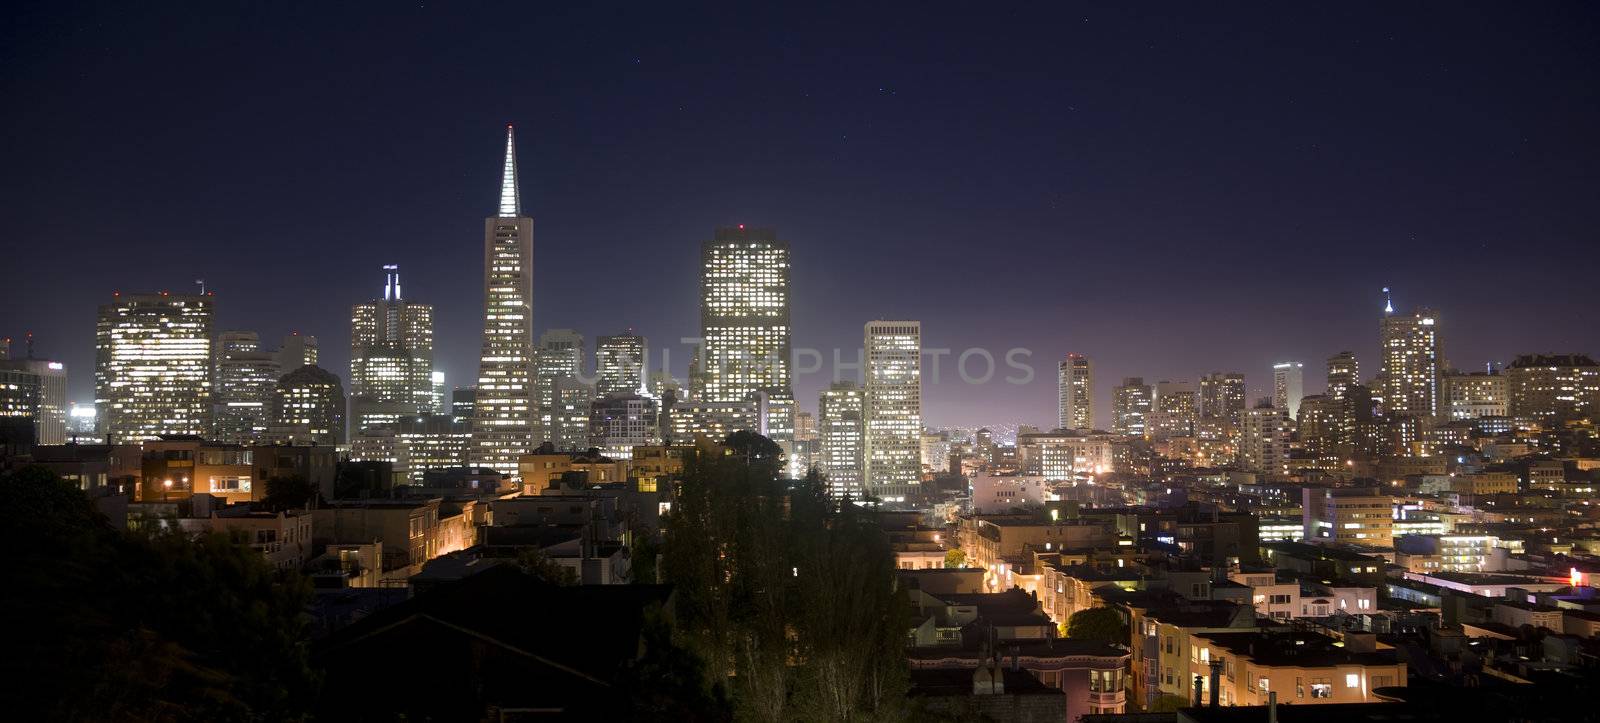 San Francisco by ChrisBoswell